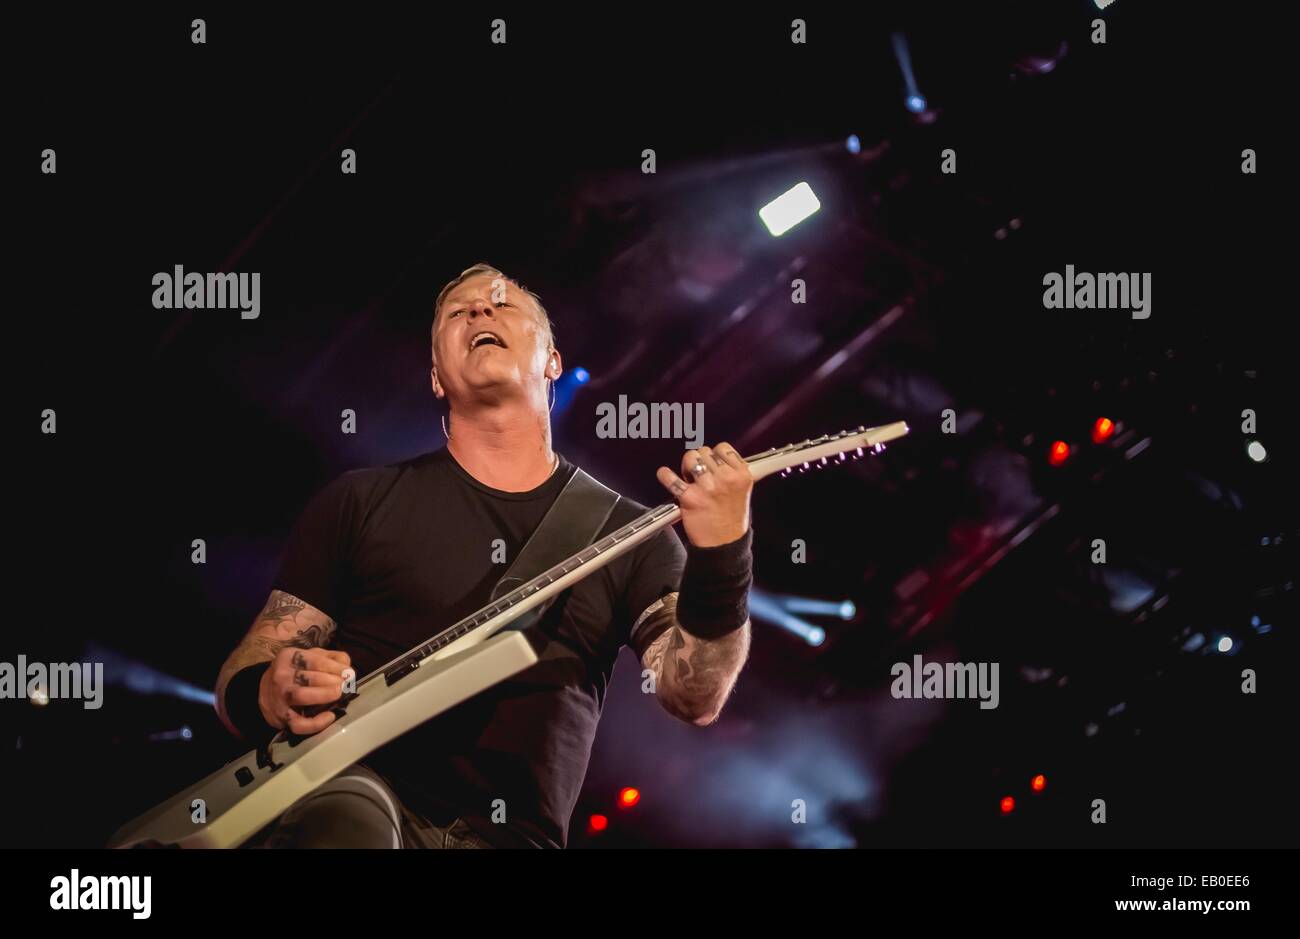 James Hetfield, front man of Metallica perform during the Concert for Valor November 11, 2014 in Washington, D.C. Stock Photo